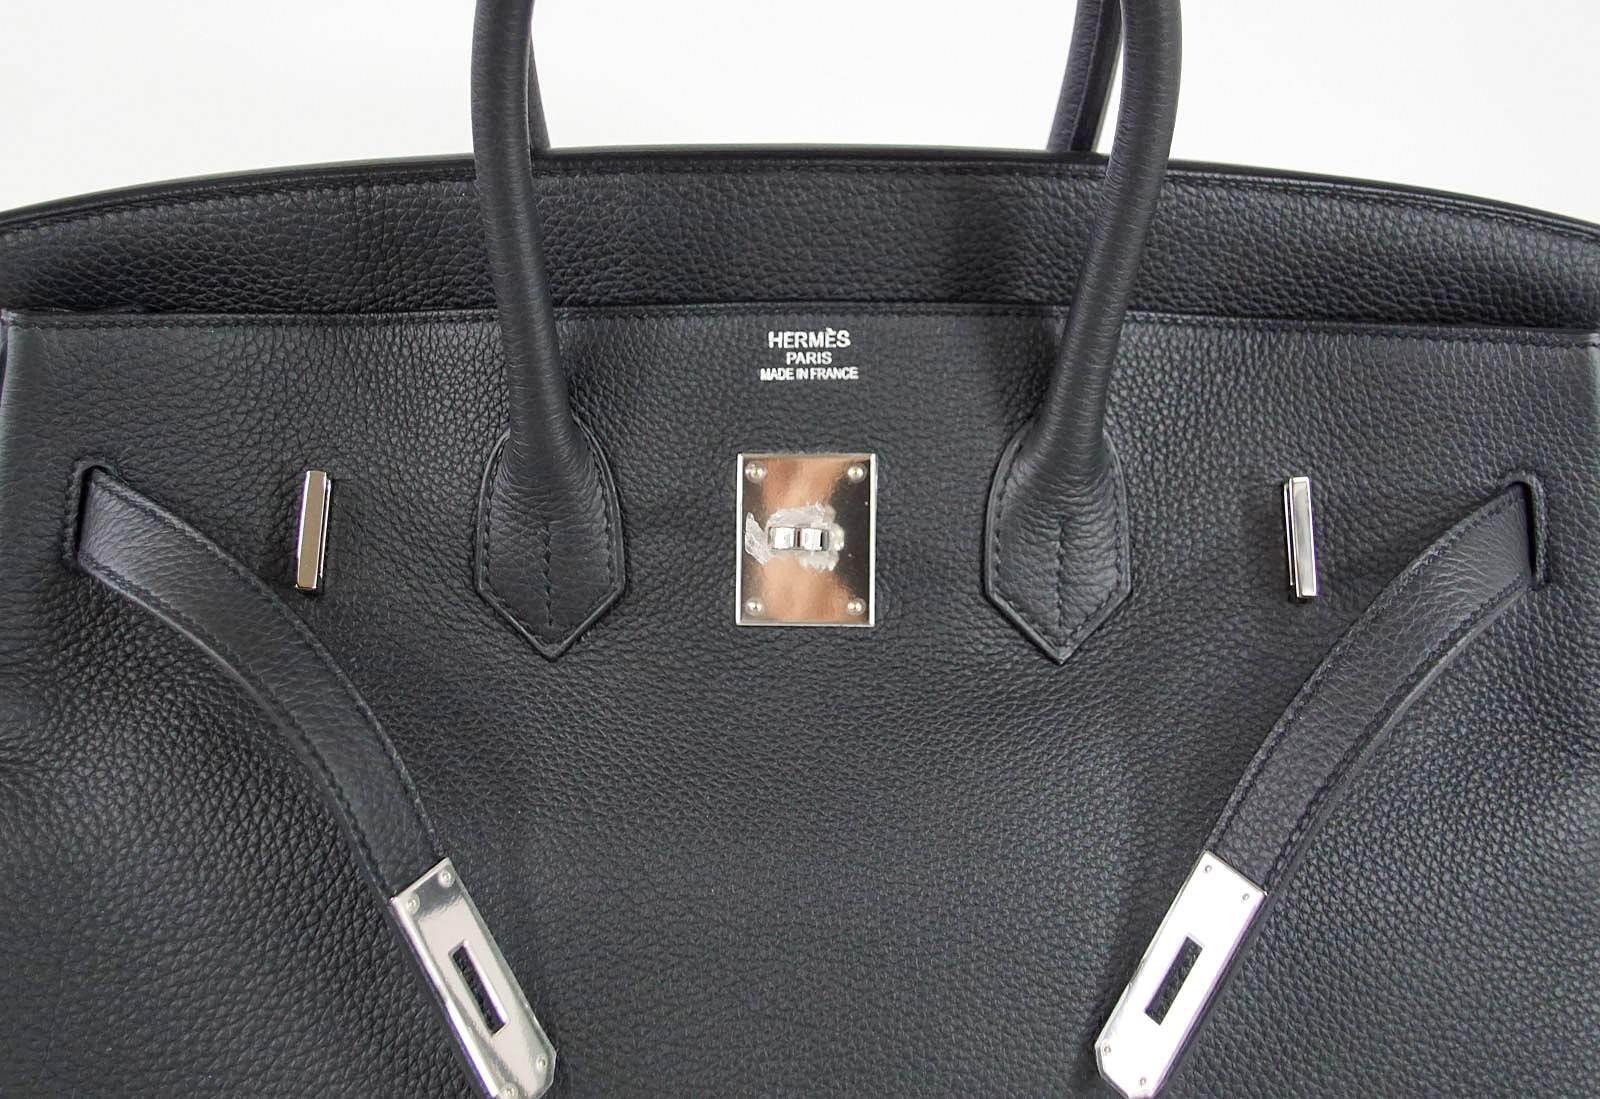 Guaranteed authentic Hermes Birkin 35 Off Black PLOMB is rare to find and so chic!
Fresh with palladium hardware.
Togo leather is textured and scratch resistant.
Please see the same bag available in 35 with gold hardware. 
Comes with lock, keys,